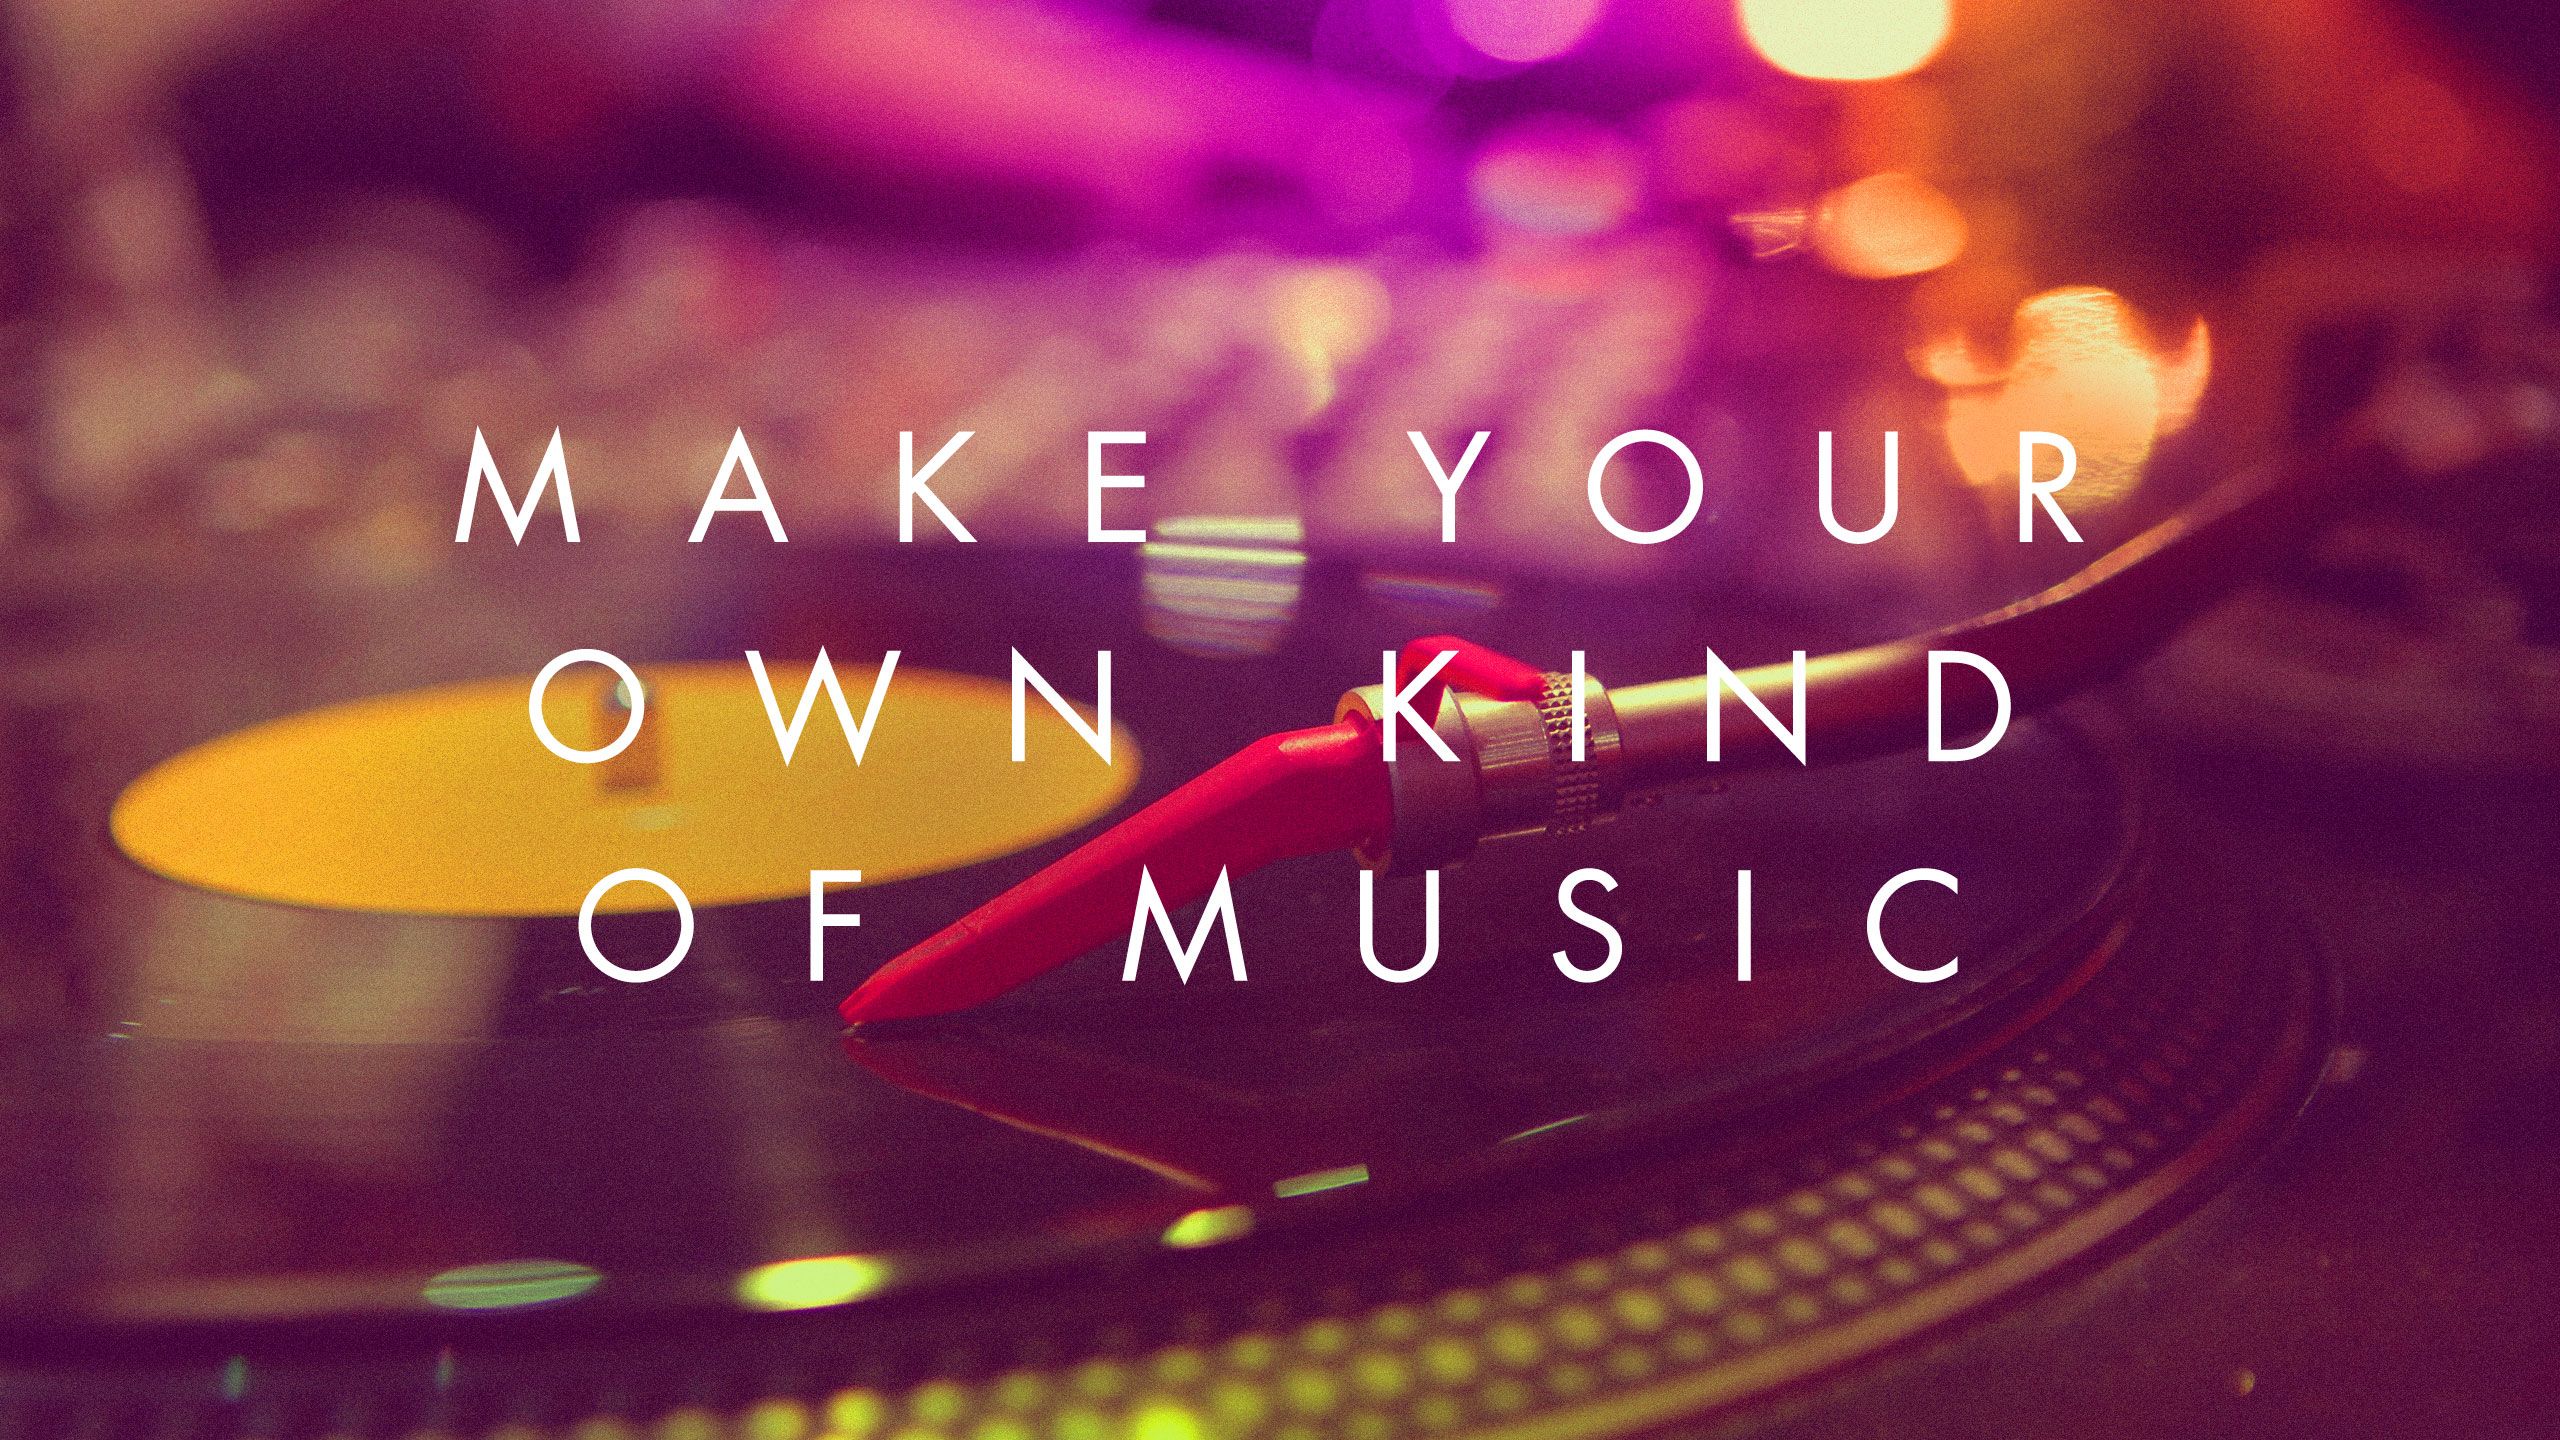 Make Your Own Kind Of Music Beautiful Words Quotes